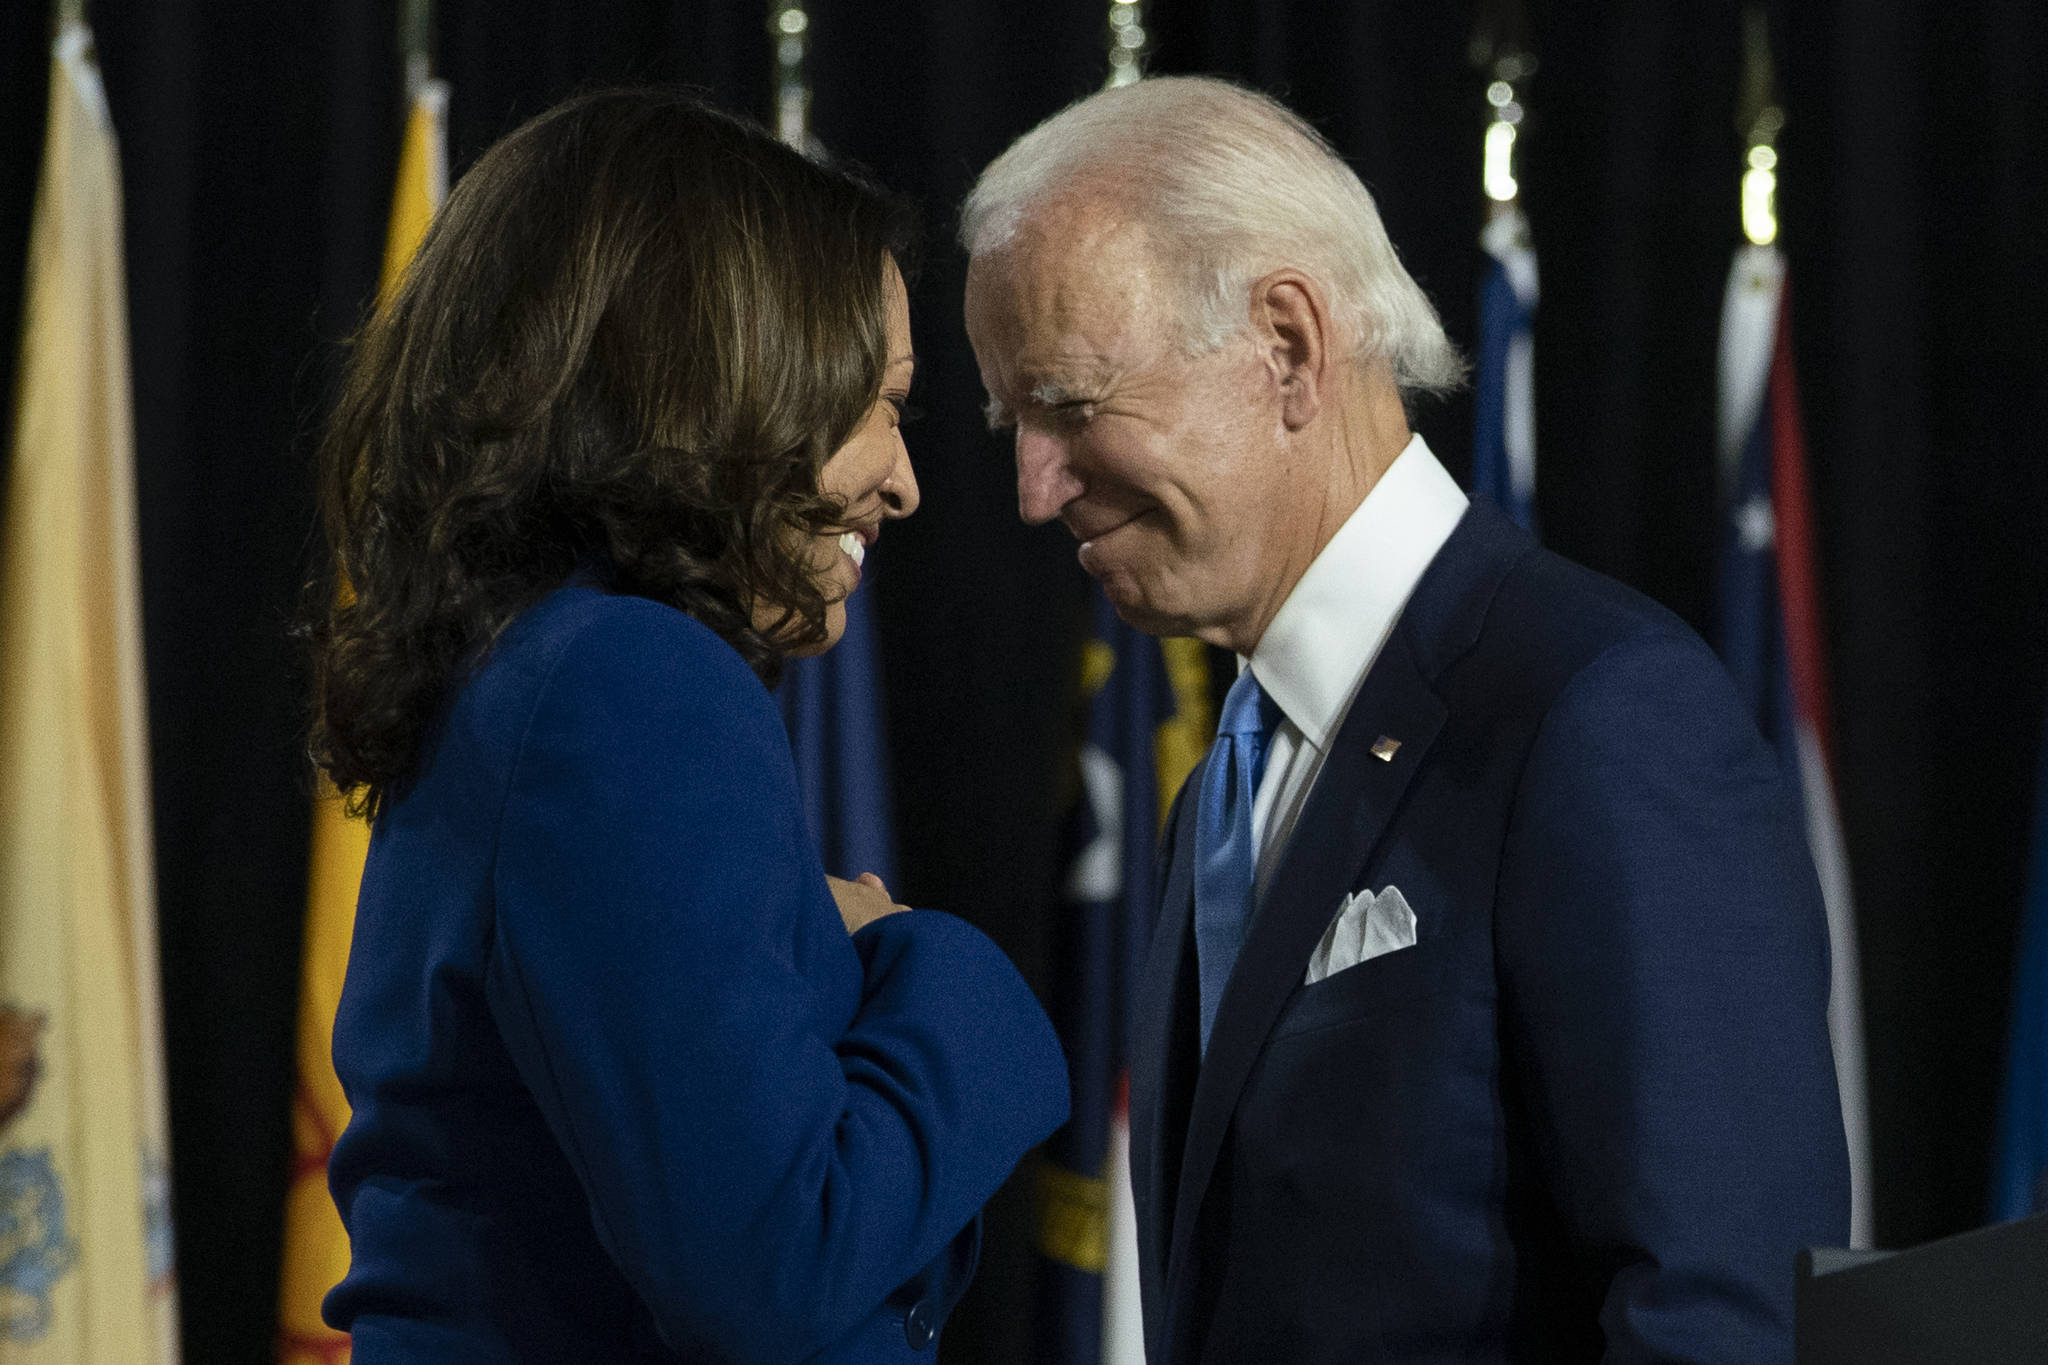 Democratic presidential candidate former Vice President Joe Biden and his running mate Sen. Kamala Harris, D-Calif., pass each other as Harris moves to the podium to speak during a campaign event at Alexis Dupont High School in Wilmington, Del. Harris made history Saturday, Nov. 7, as the first Black woman elected as vice president of the United States, shattering barriers that have kept men — almost all of them white — entrenched at the highest levels of American politics for more than two centuries. (AP Photo / Carolyn Kaster)